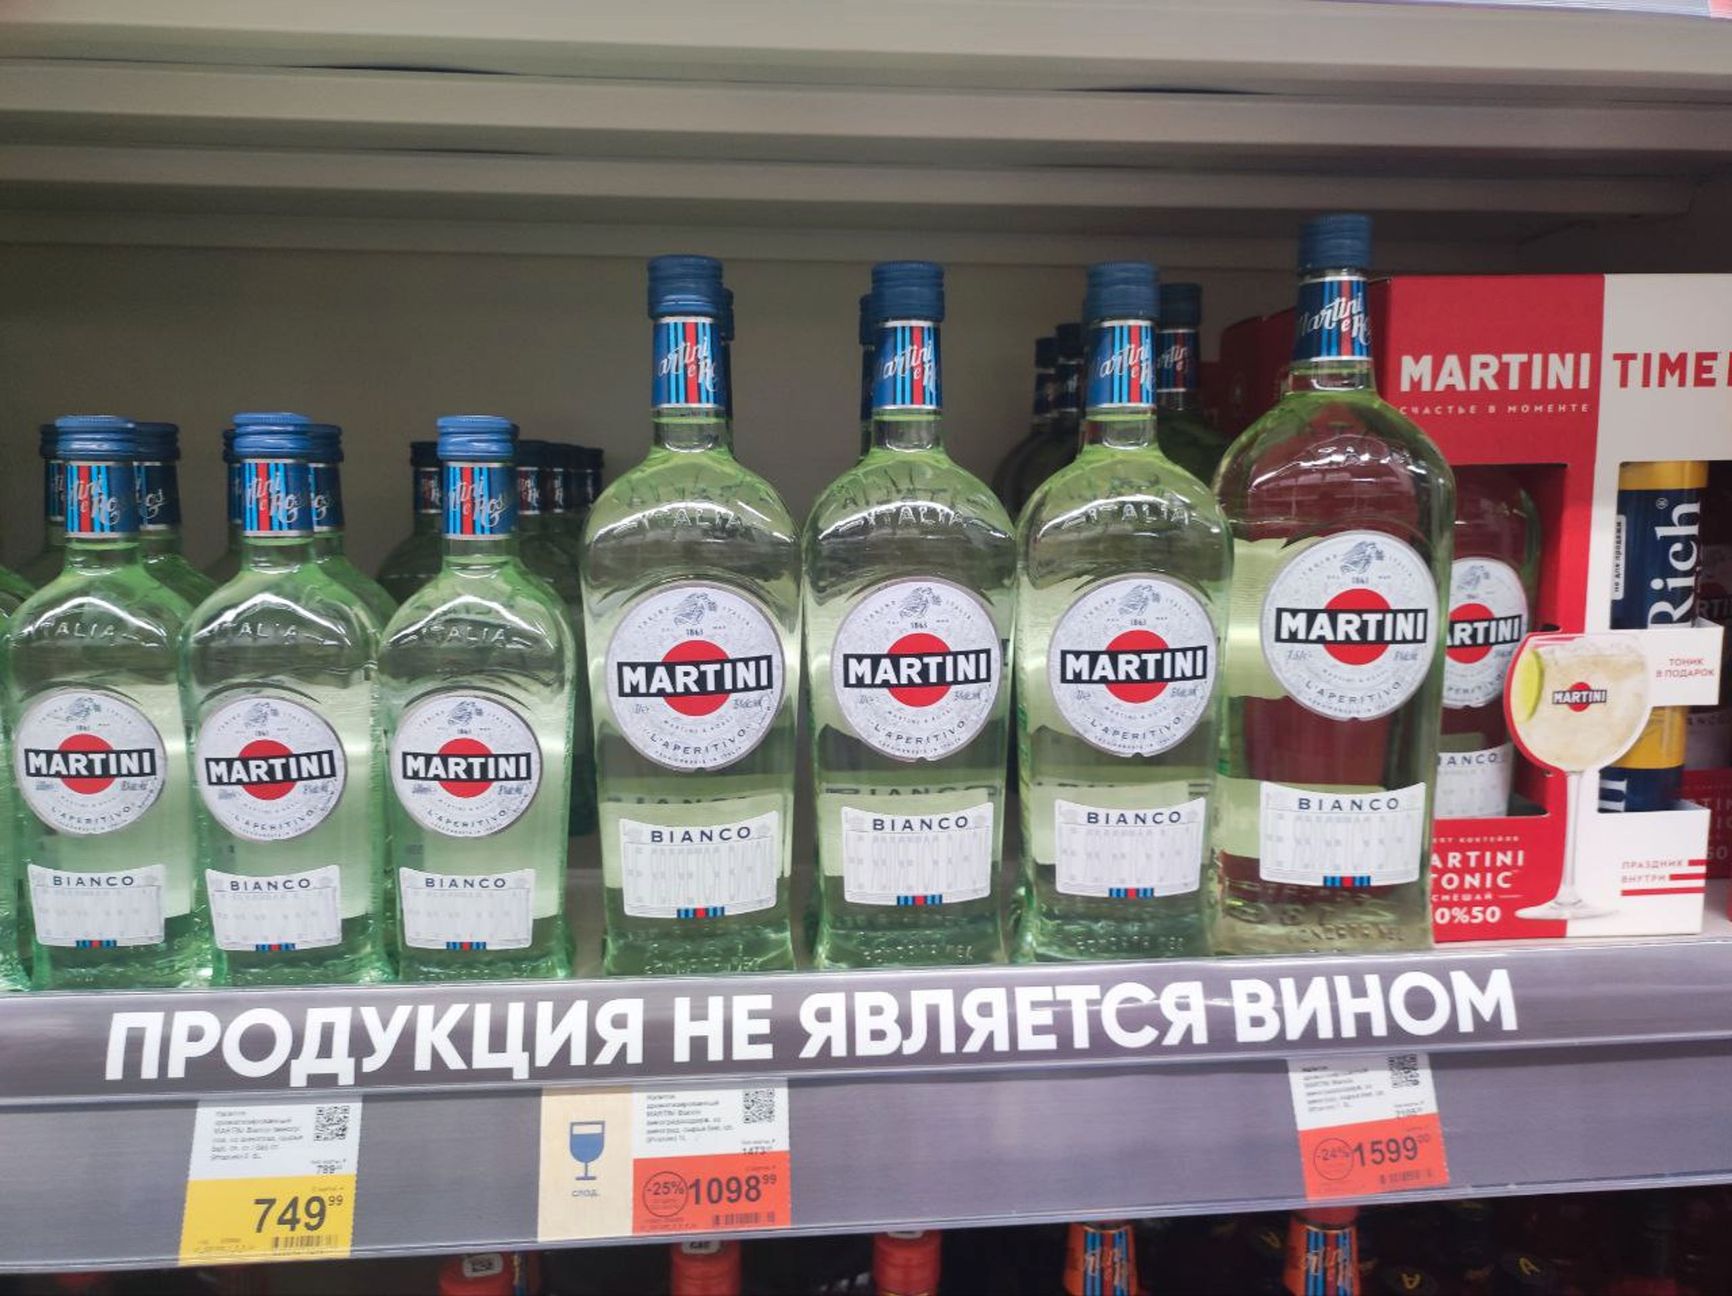 Bacardi products at a Lenta grocery chain store